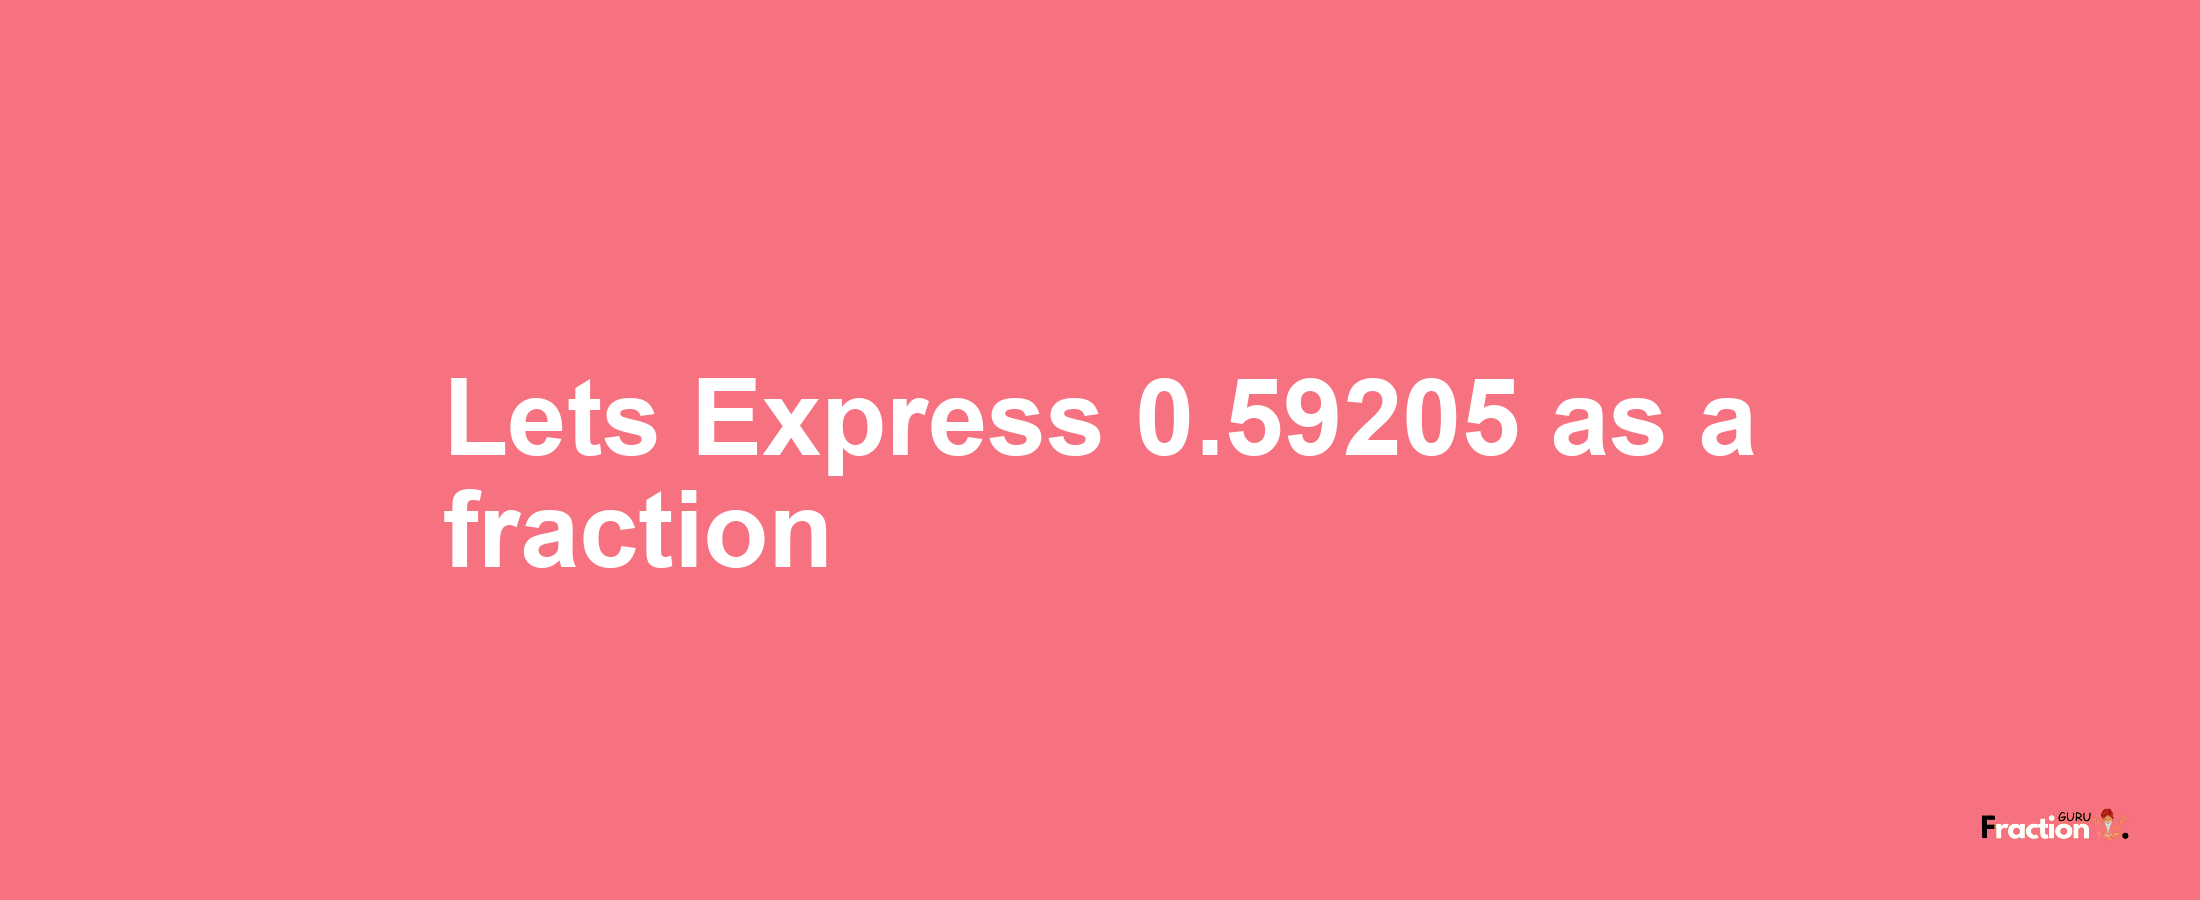 Lets Express 0.59205 as afraction